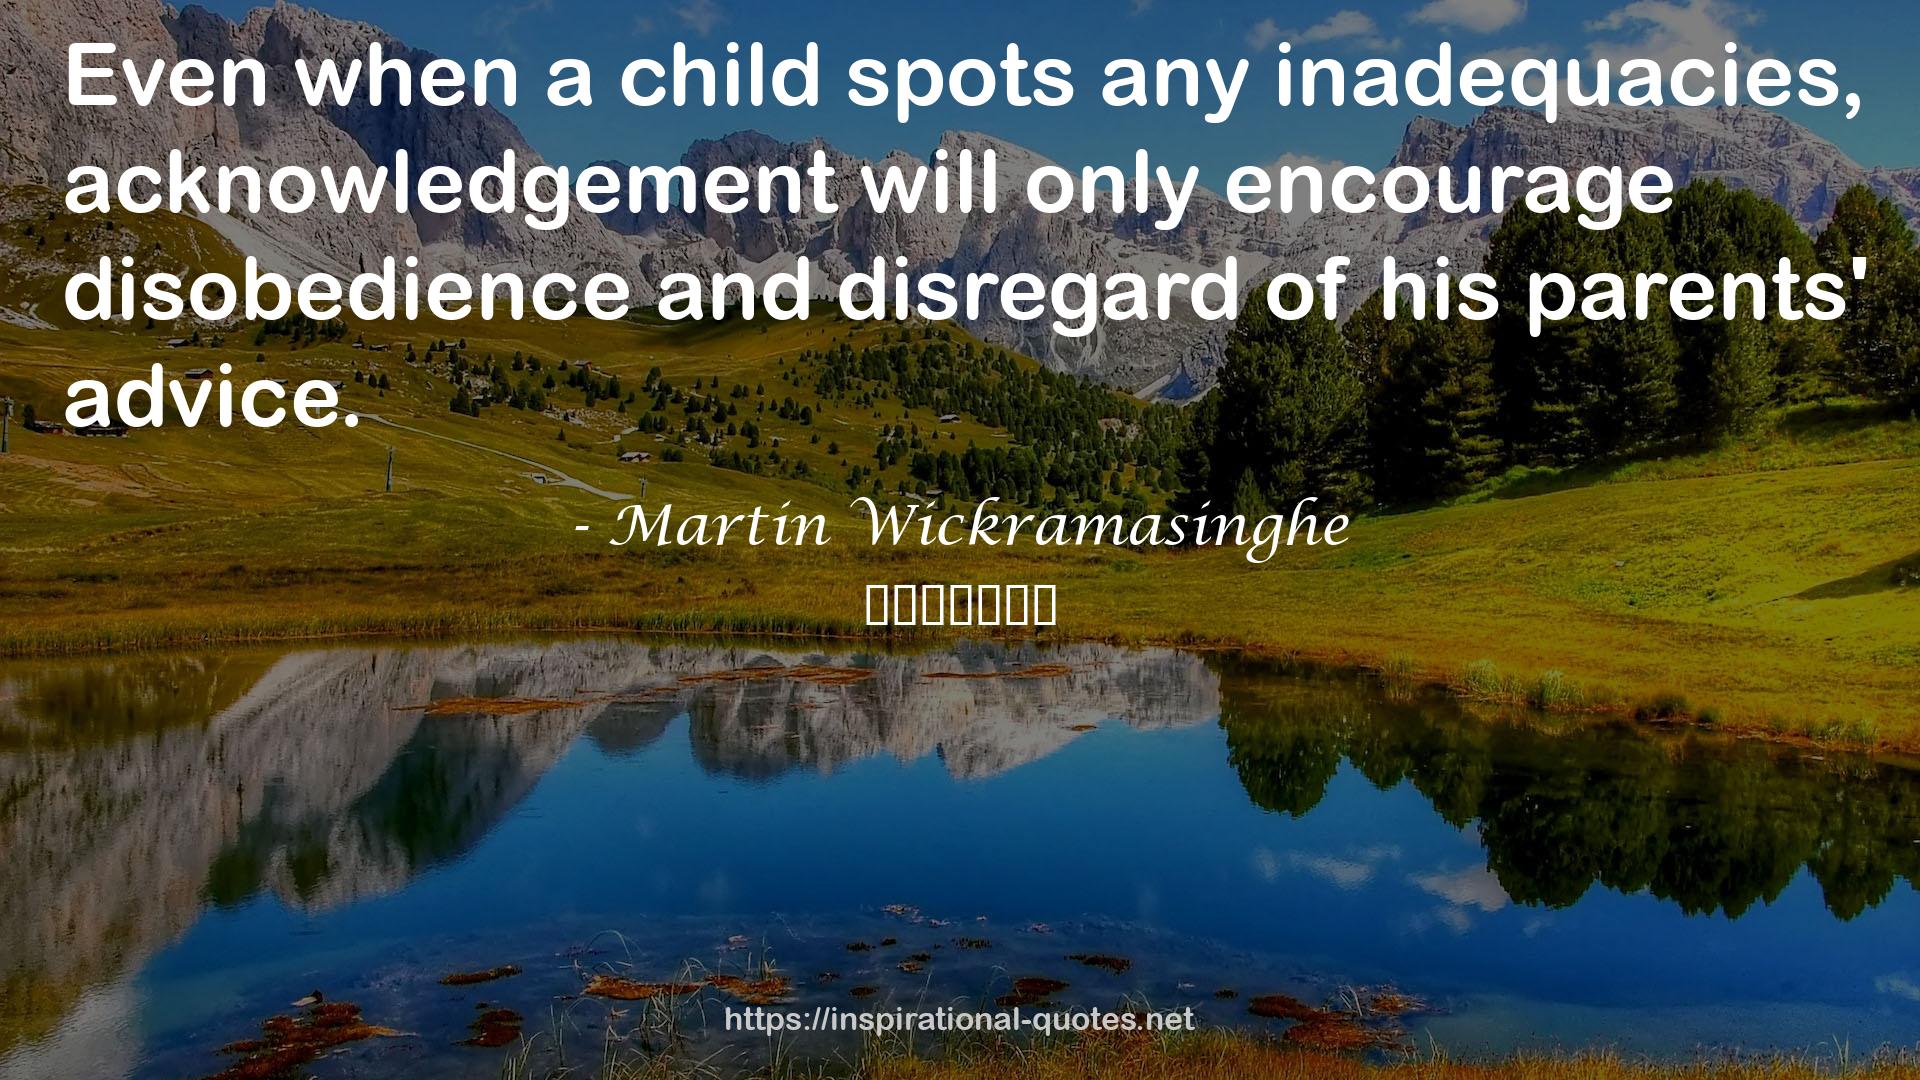 Martin Wickramasinghe QUOTES